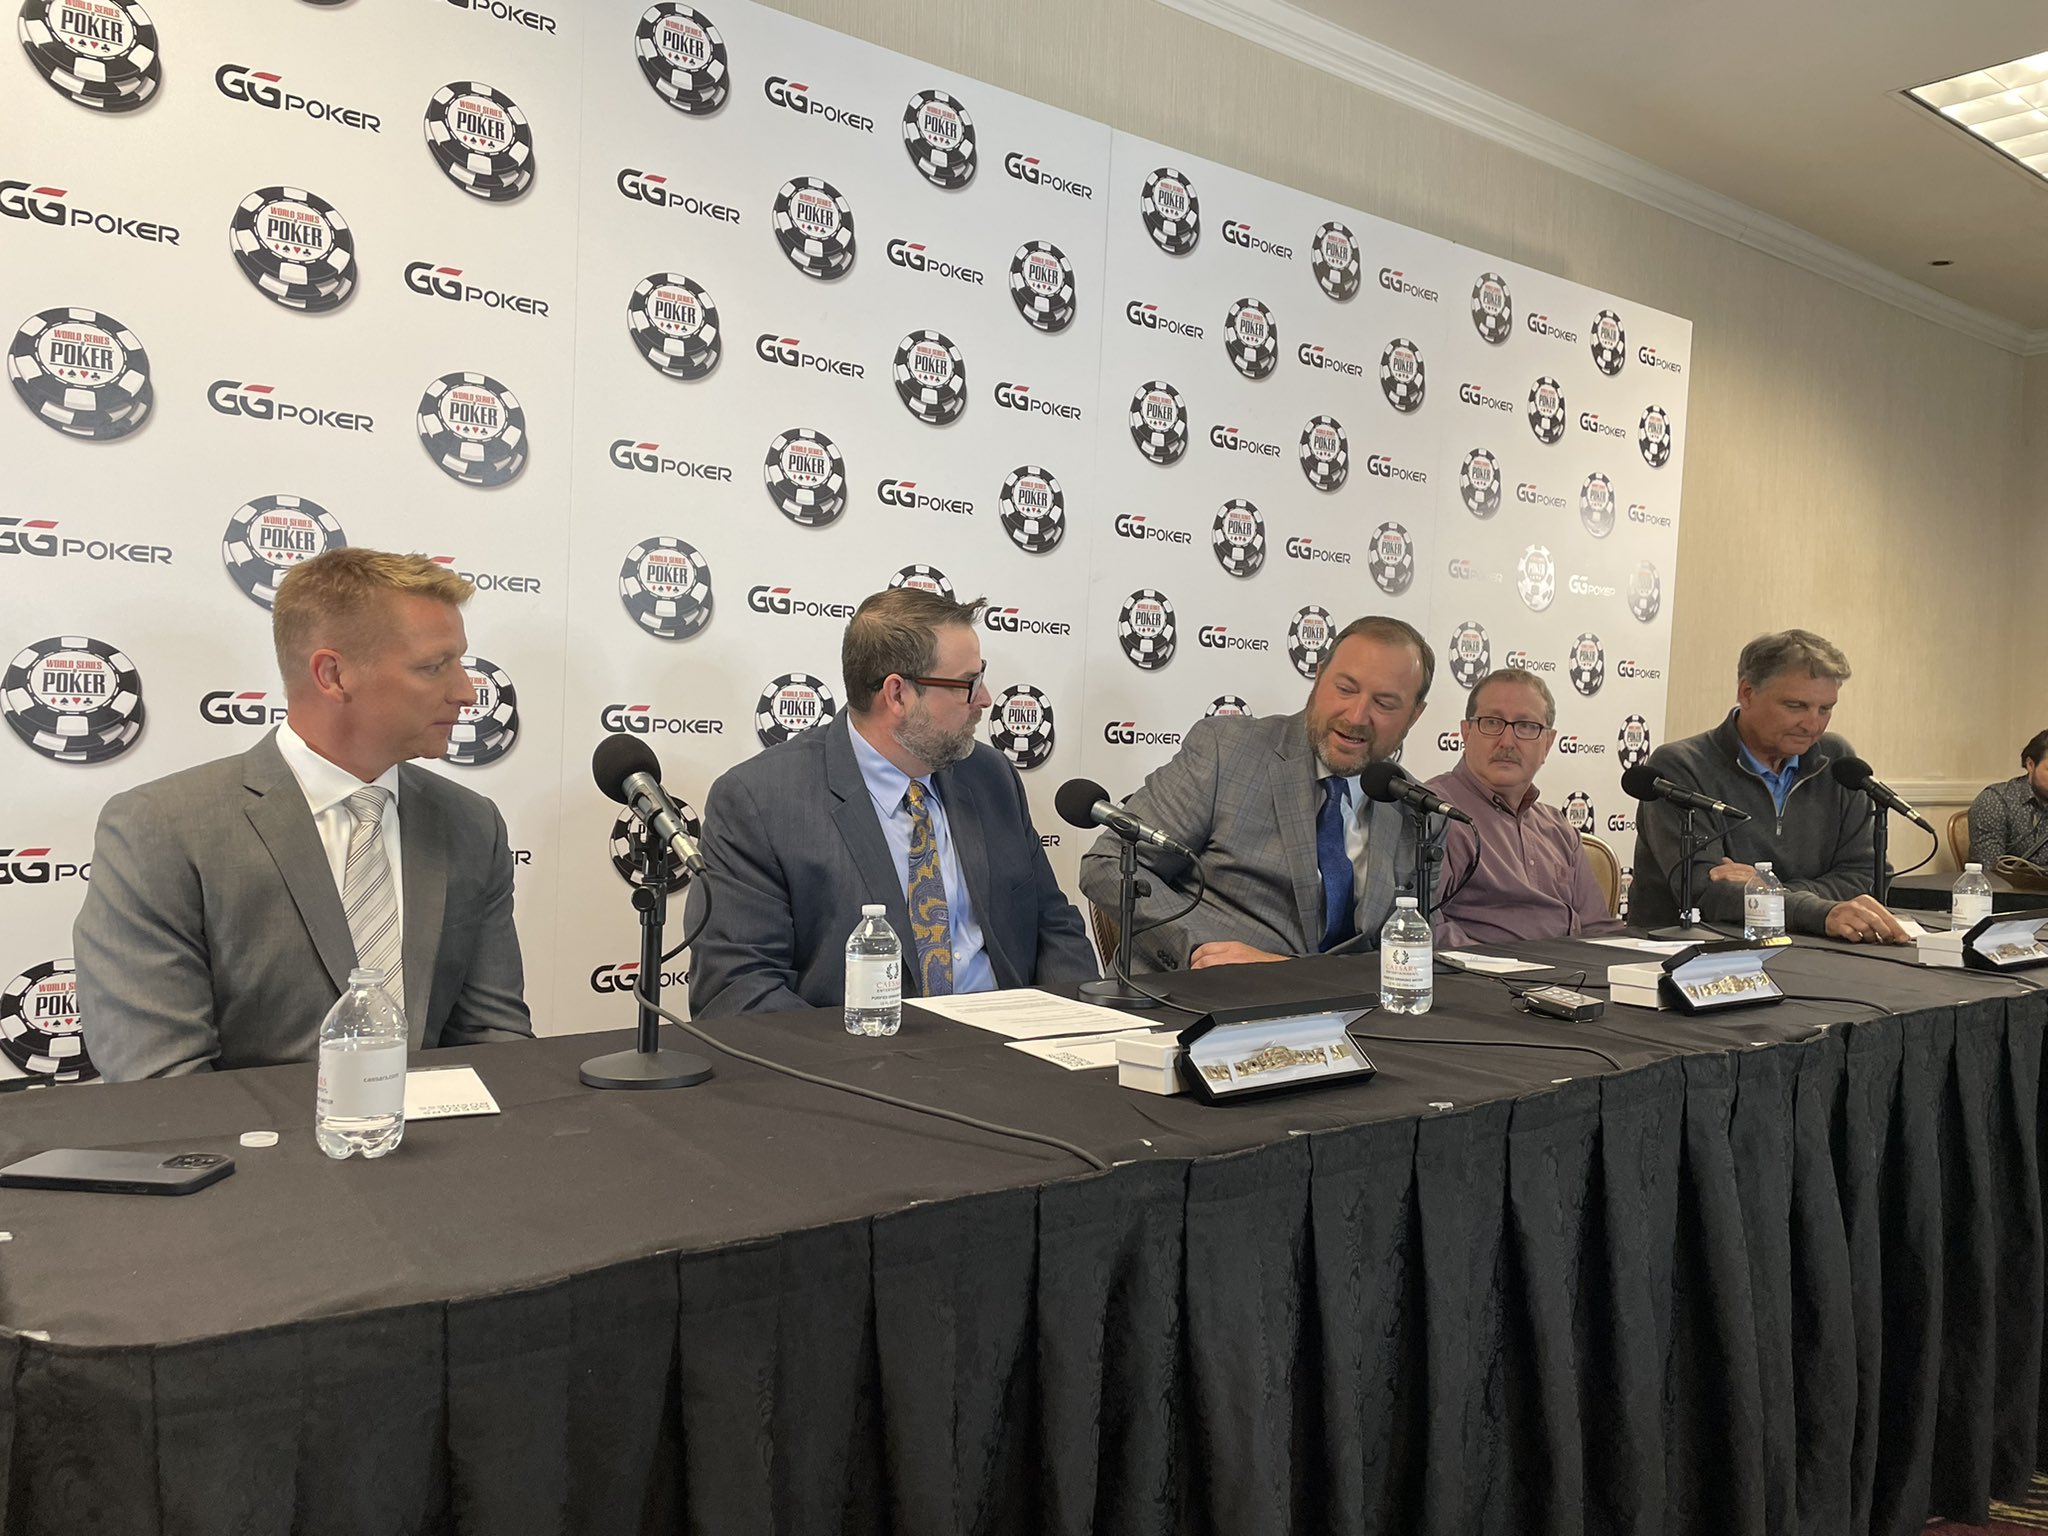 Officials Offer First Look at 2022 WSOP; Answer Several Lingering Questions